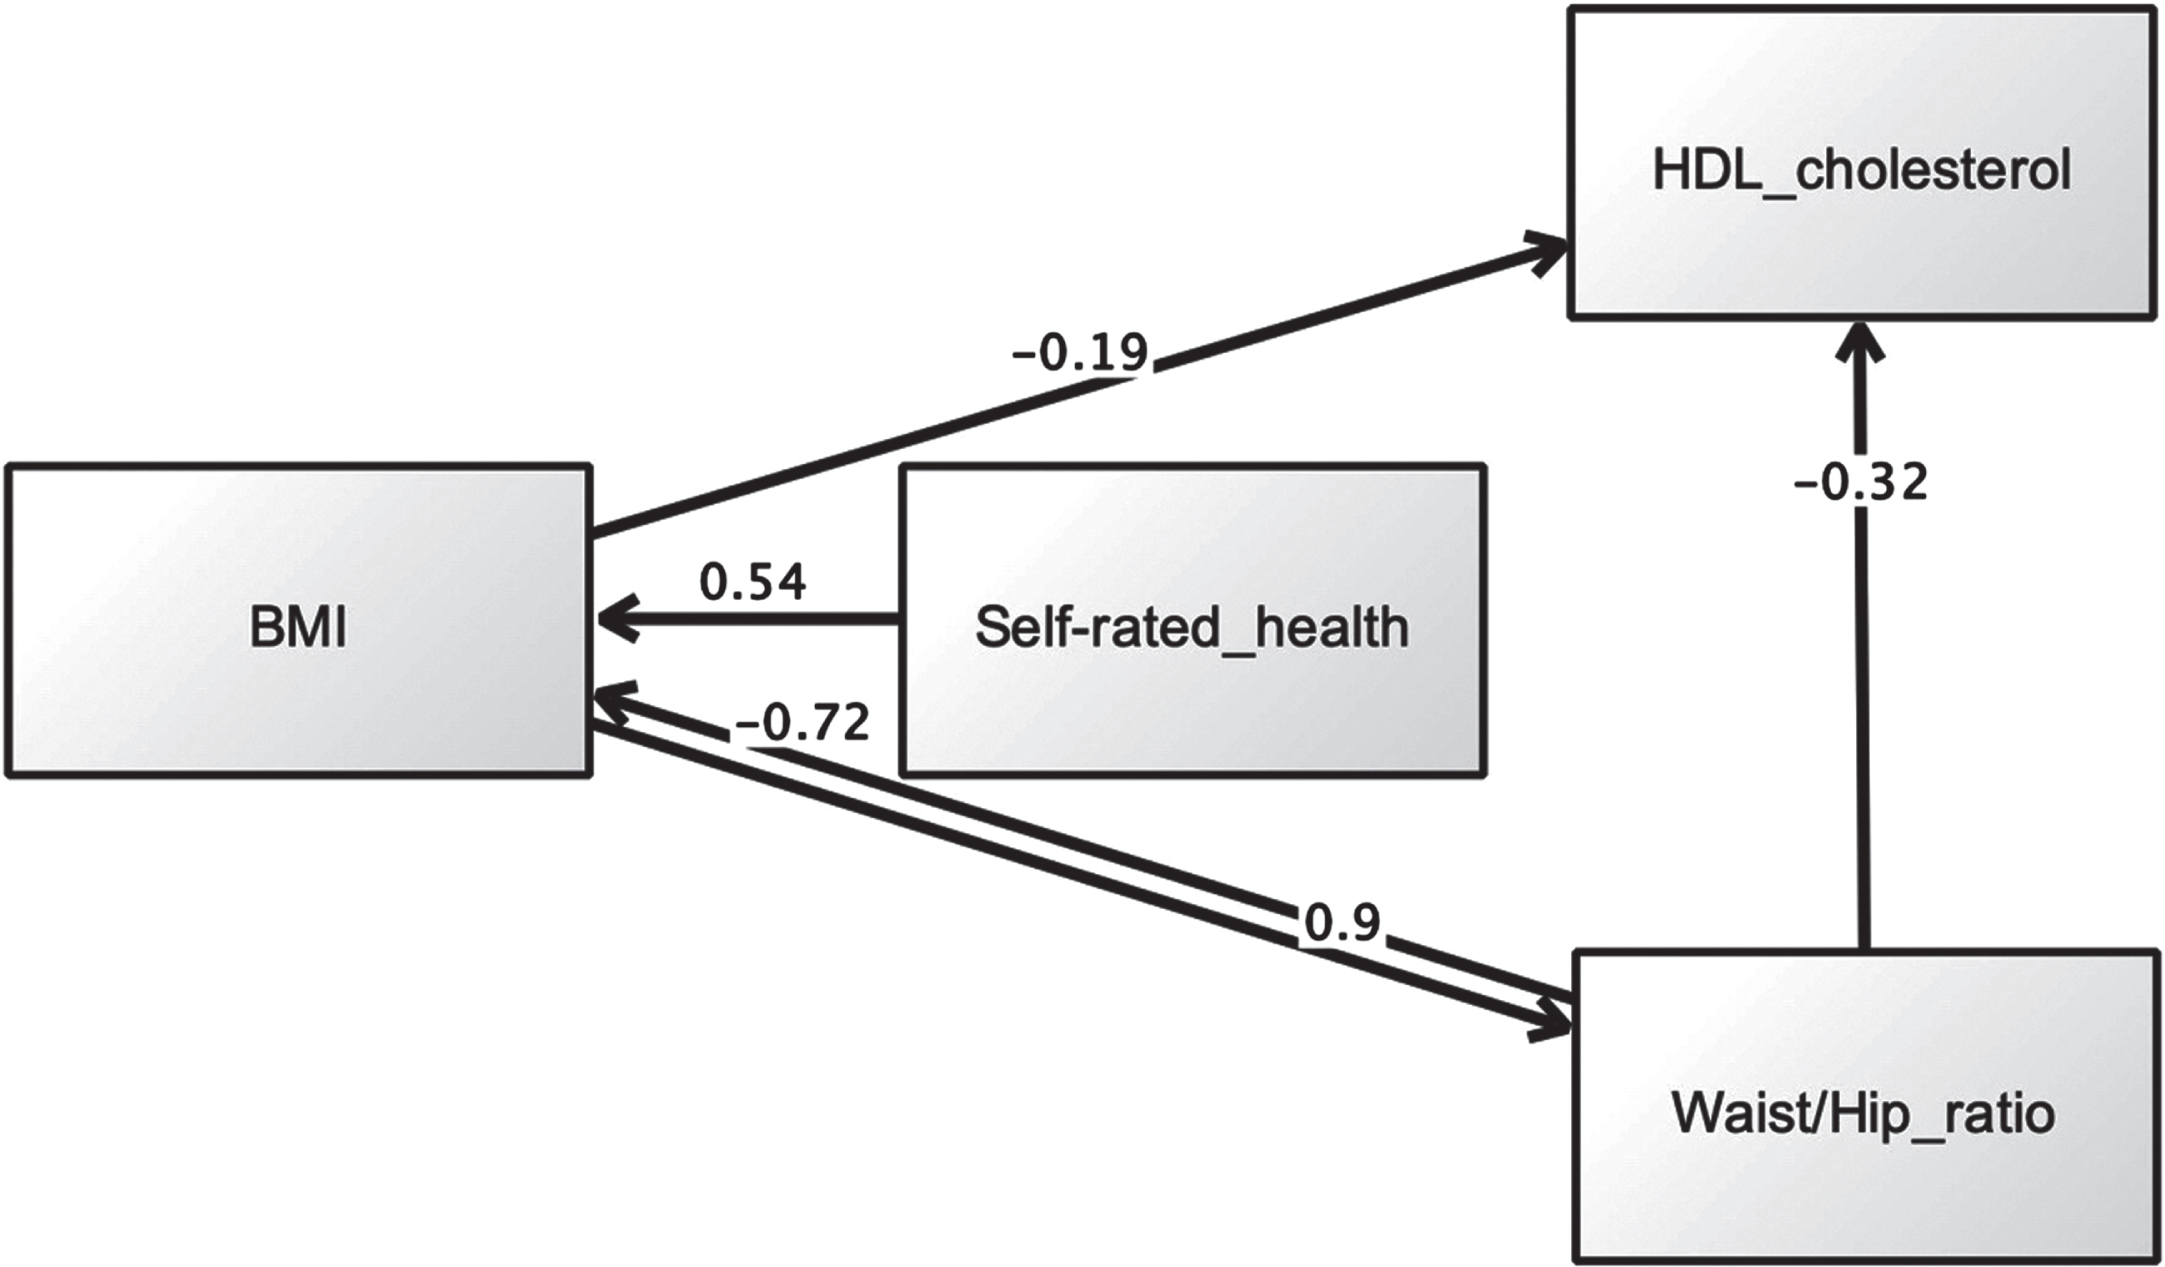 Second SEM model showing a direct link between SRH and BMI, but no mediating effect for SRH.